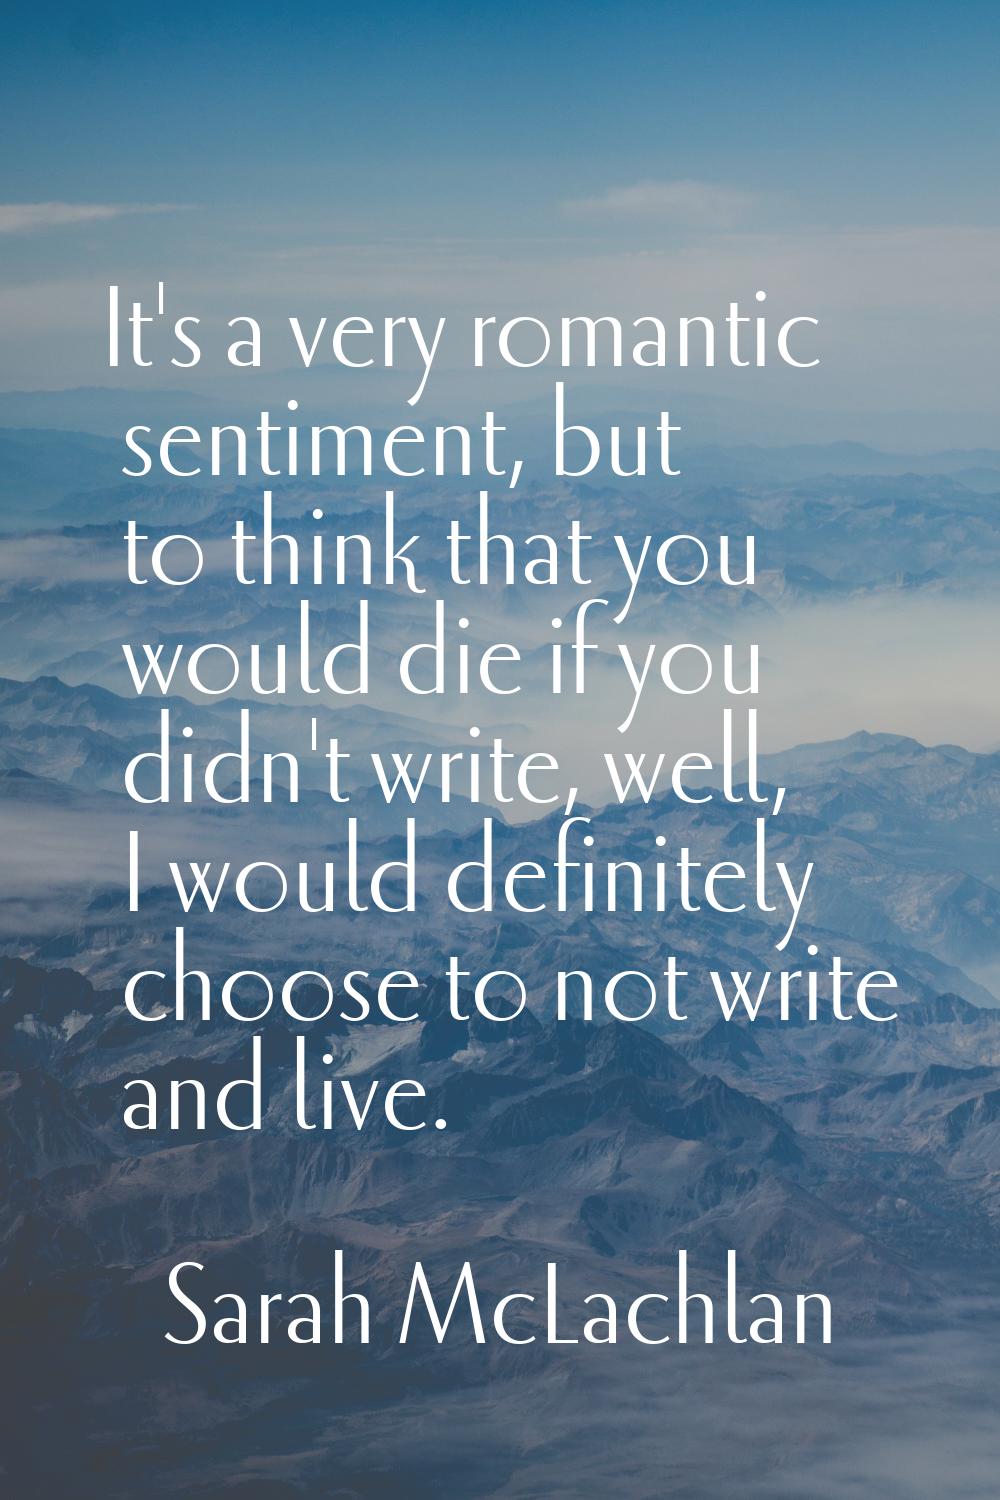 It's a very romantic sentiment, but to think that you would die if you didn't write, well, I would 